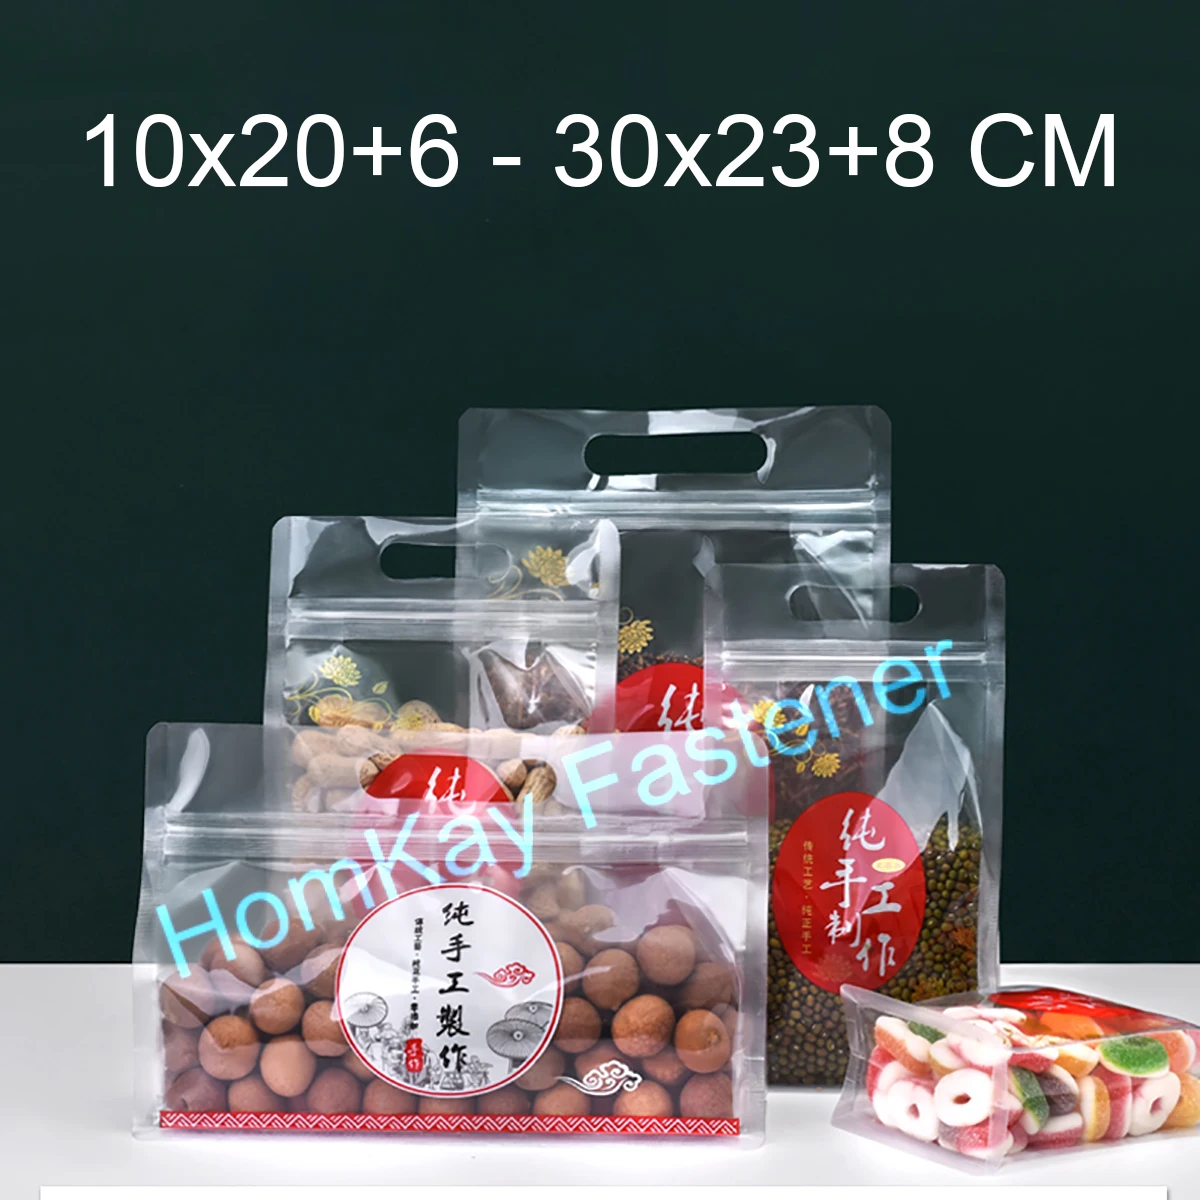 

50pcs 10x20+6-30x23+8cm Printing Tote Bag Thickened Self-supporting Bag Eight-side Sealing Self-sealing Snack Food Packaging Bag